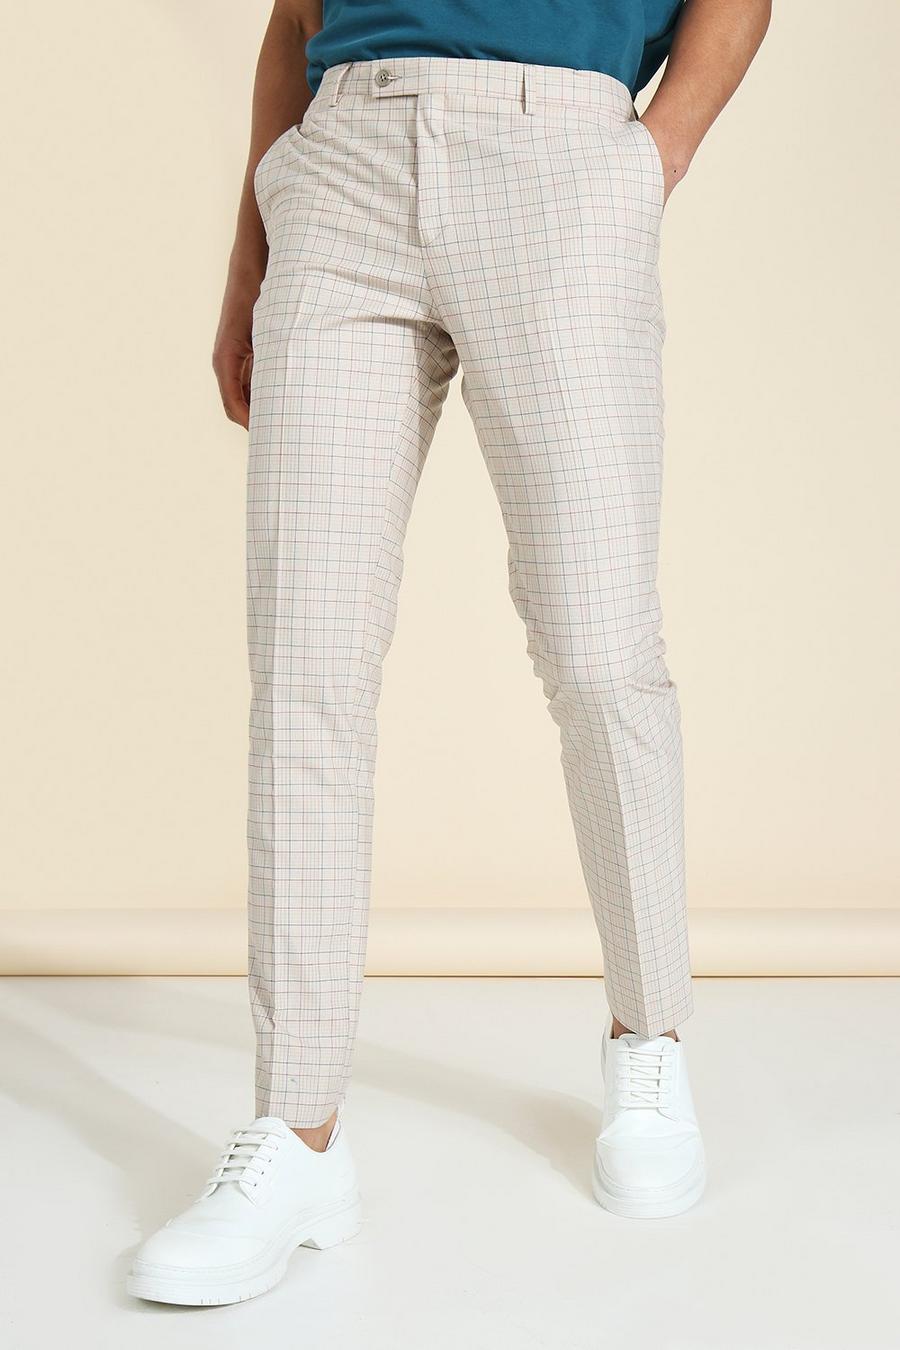 Beige Skinny Check Taloired Pants image number 1